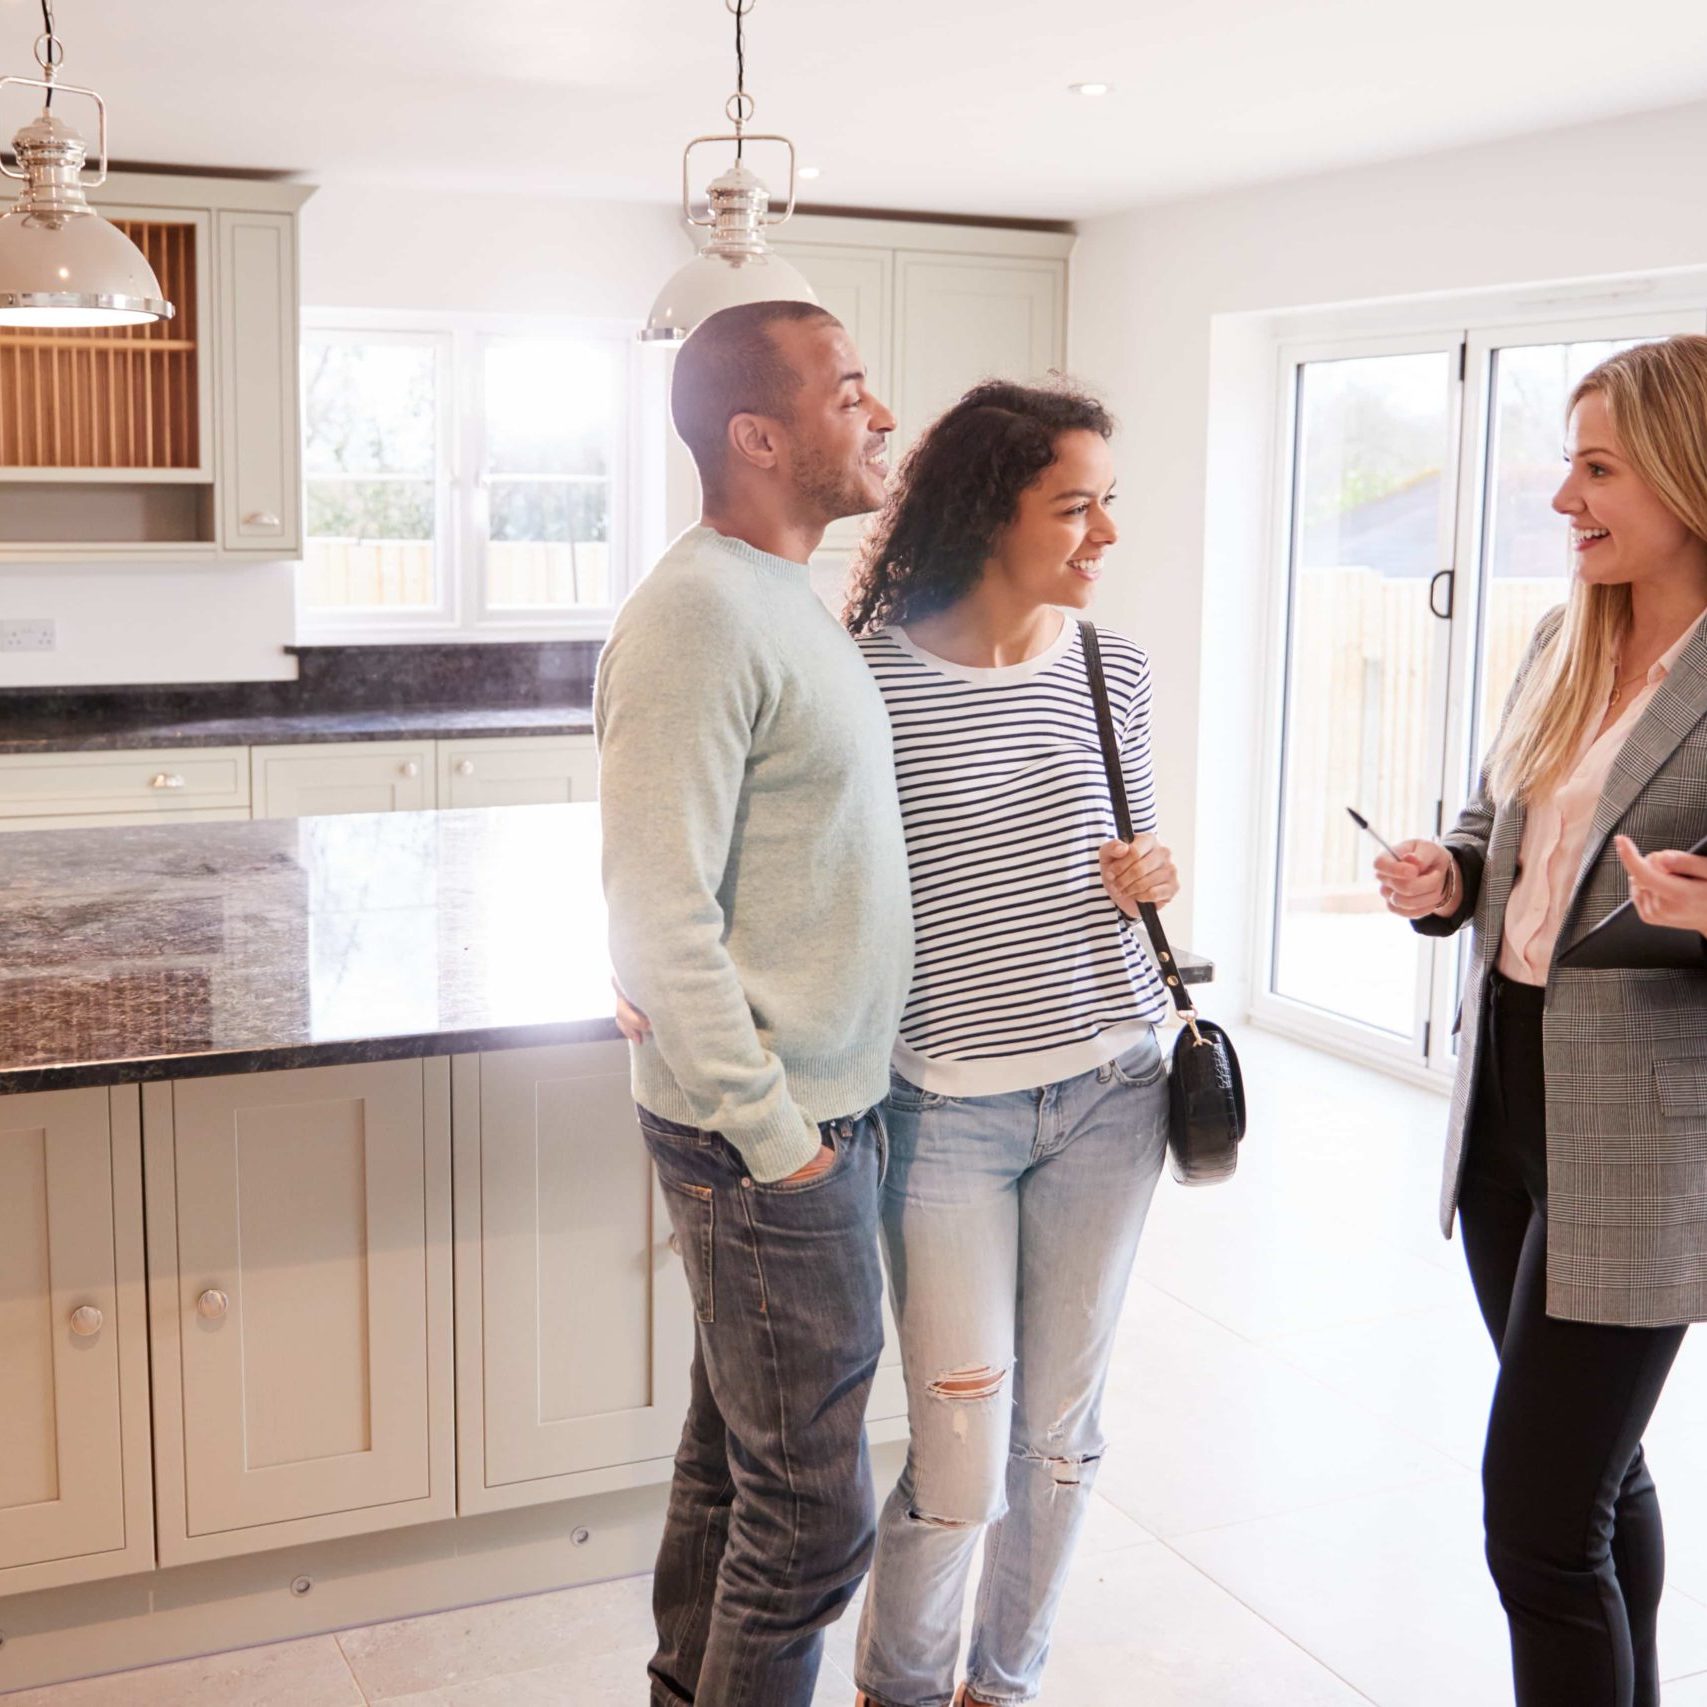 Female Realtor Showing Couple Interested In Buying Around House